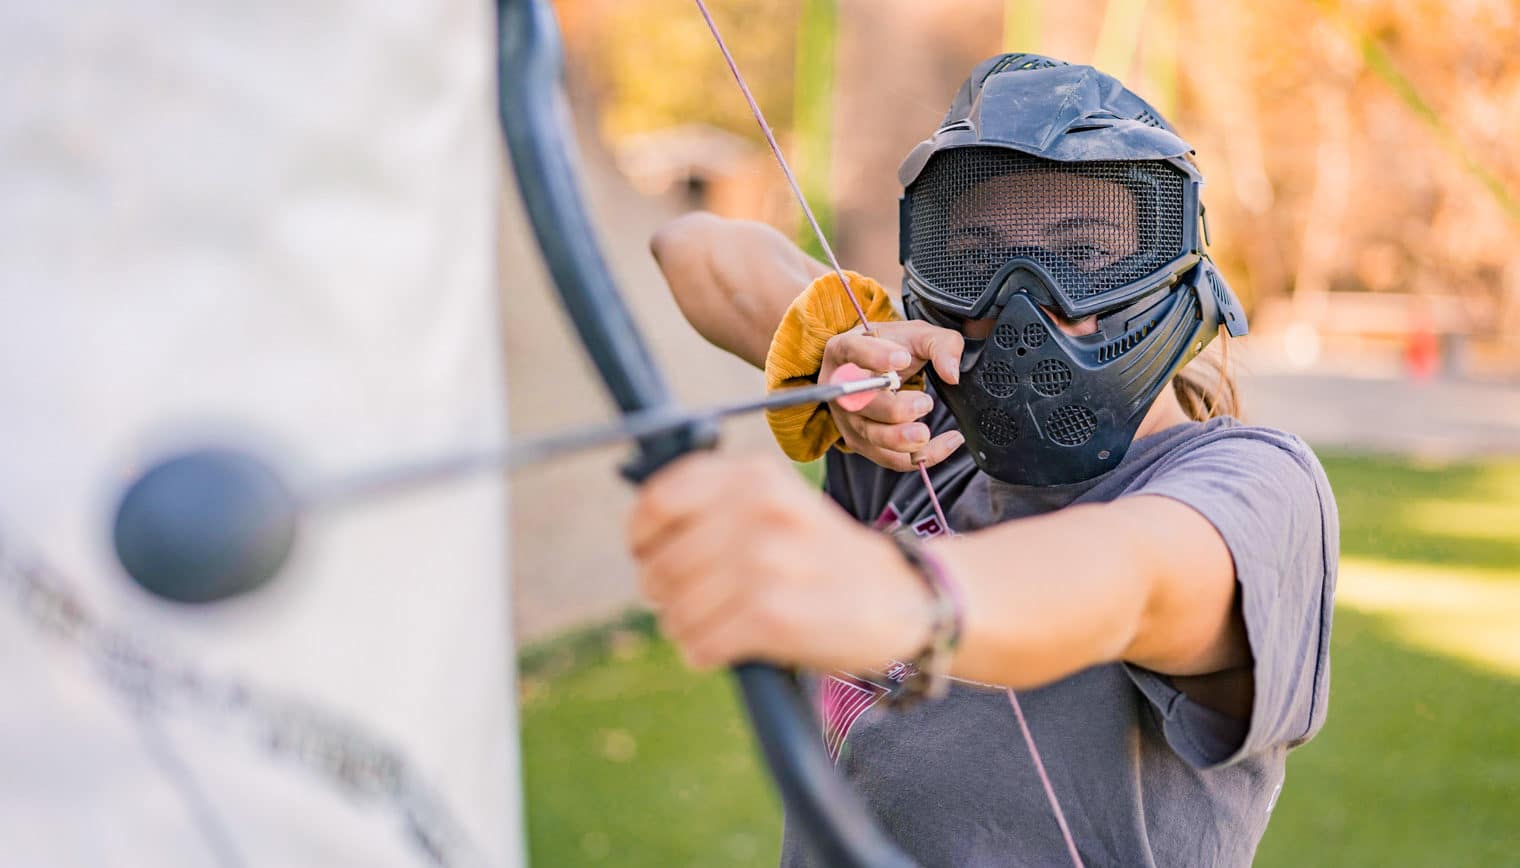 A woman in archery tag gear, aiming a bow and arrow.